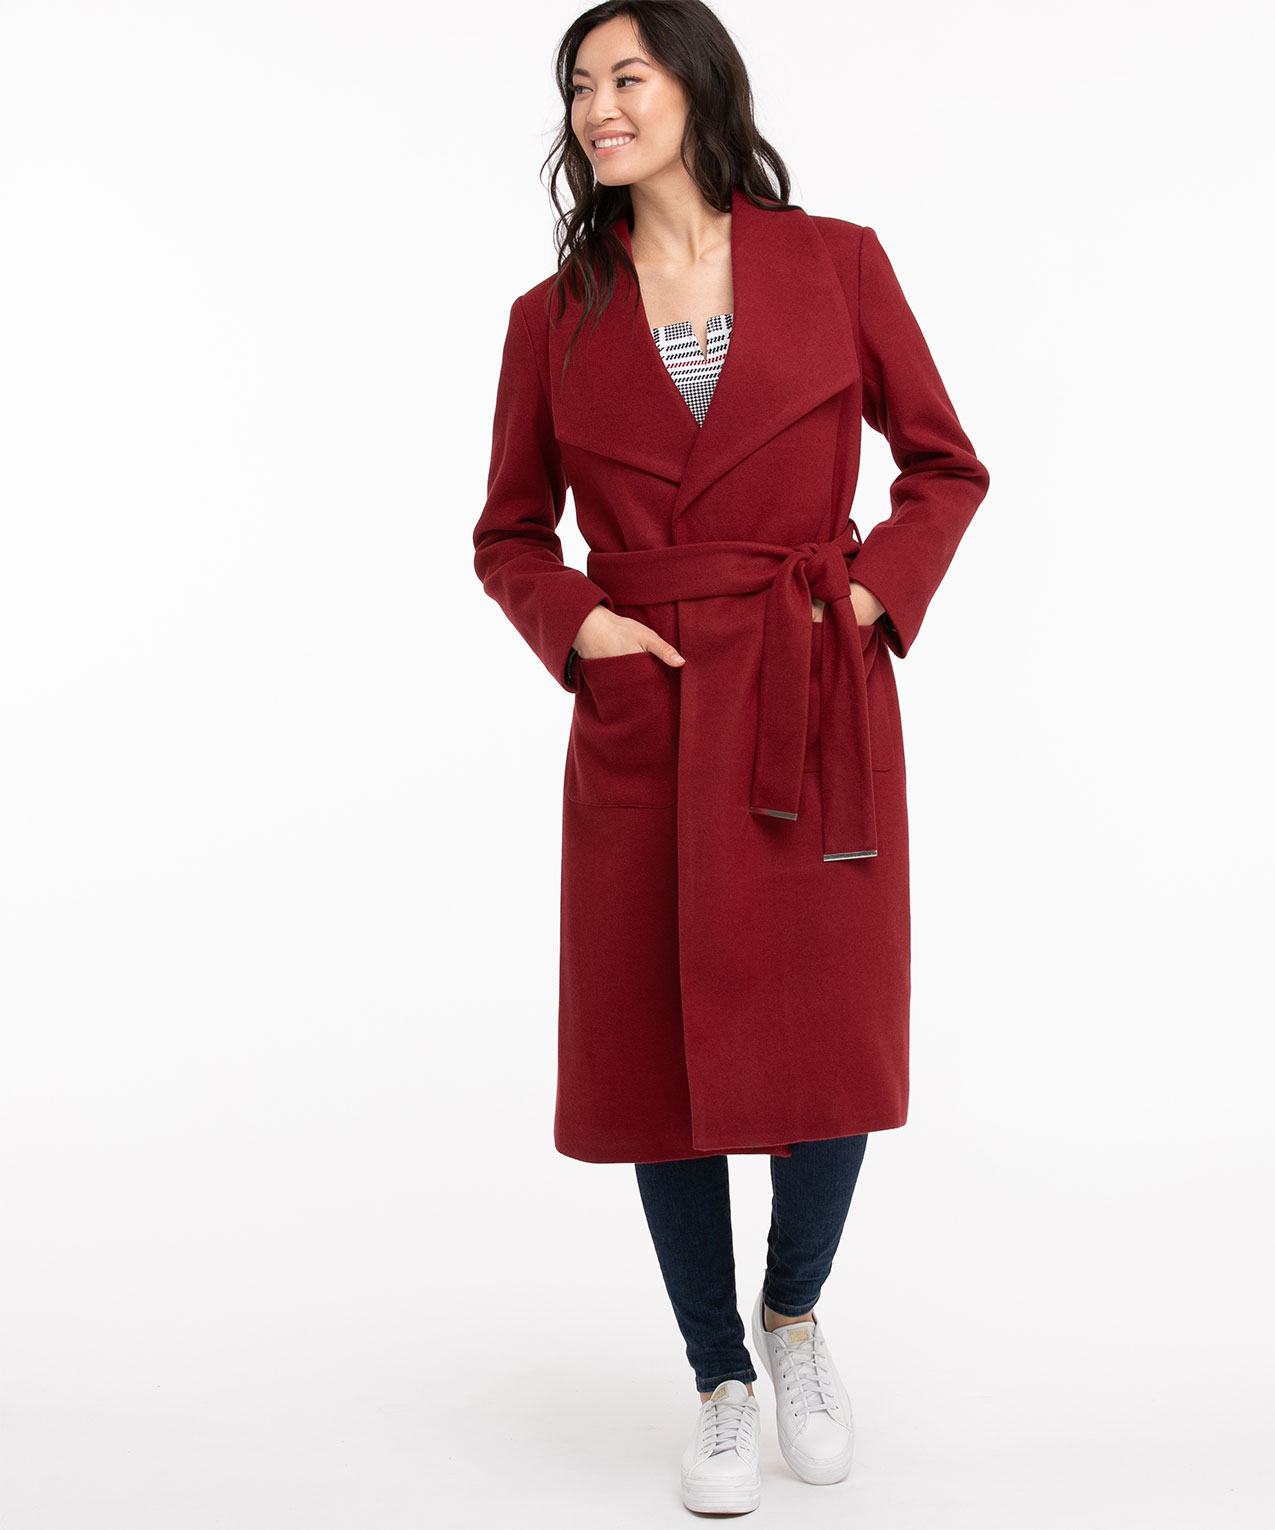 Monogram Stripes Belted Coat - Ready-to-Wear 1A9JY0